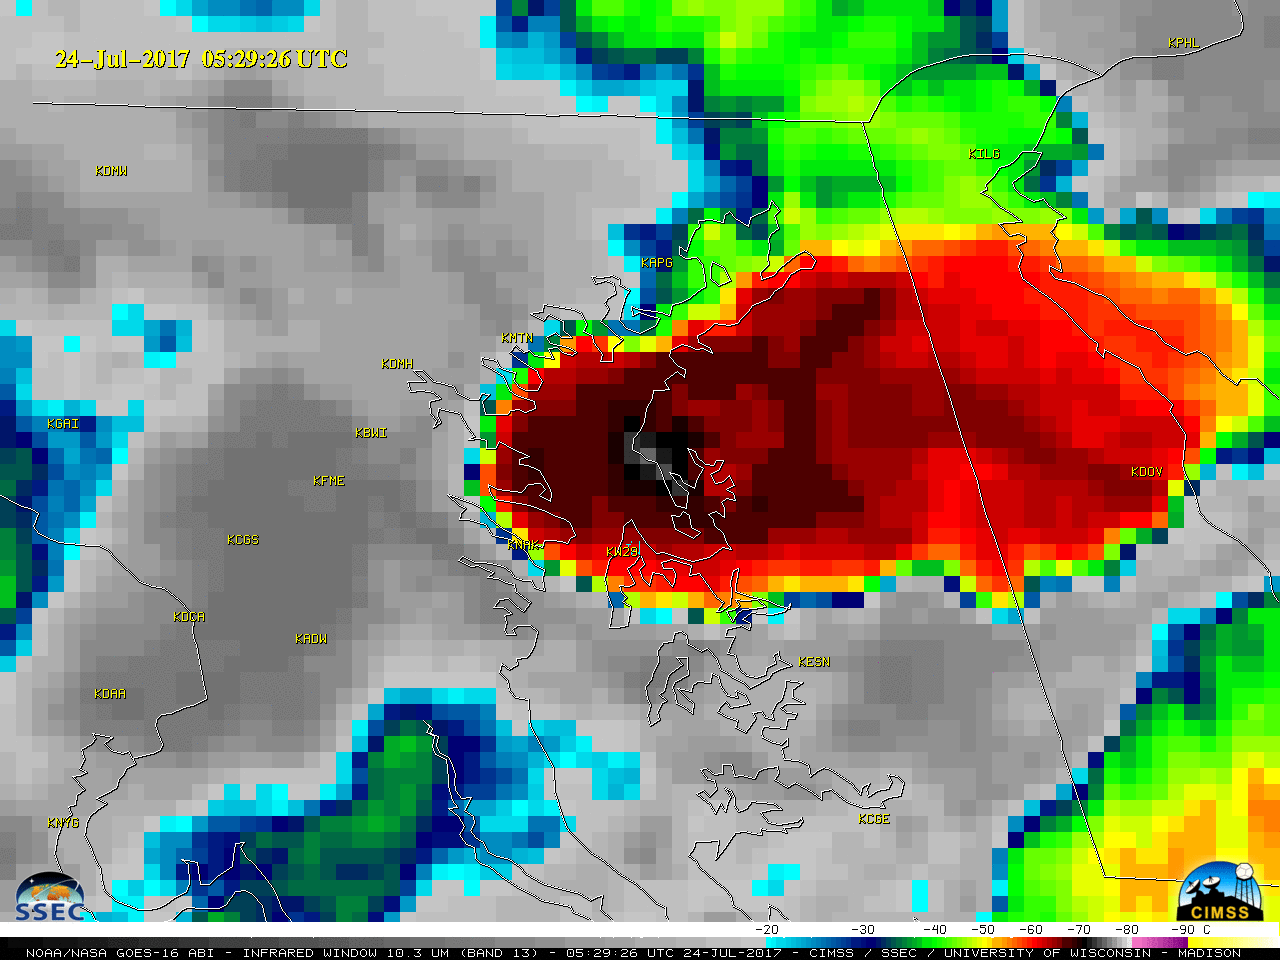 GOES-16 Infrared Window (10.3 µm) images, with surface station identifiers plotted in yellow [click to play MP4 animation]